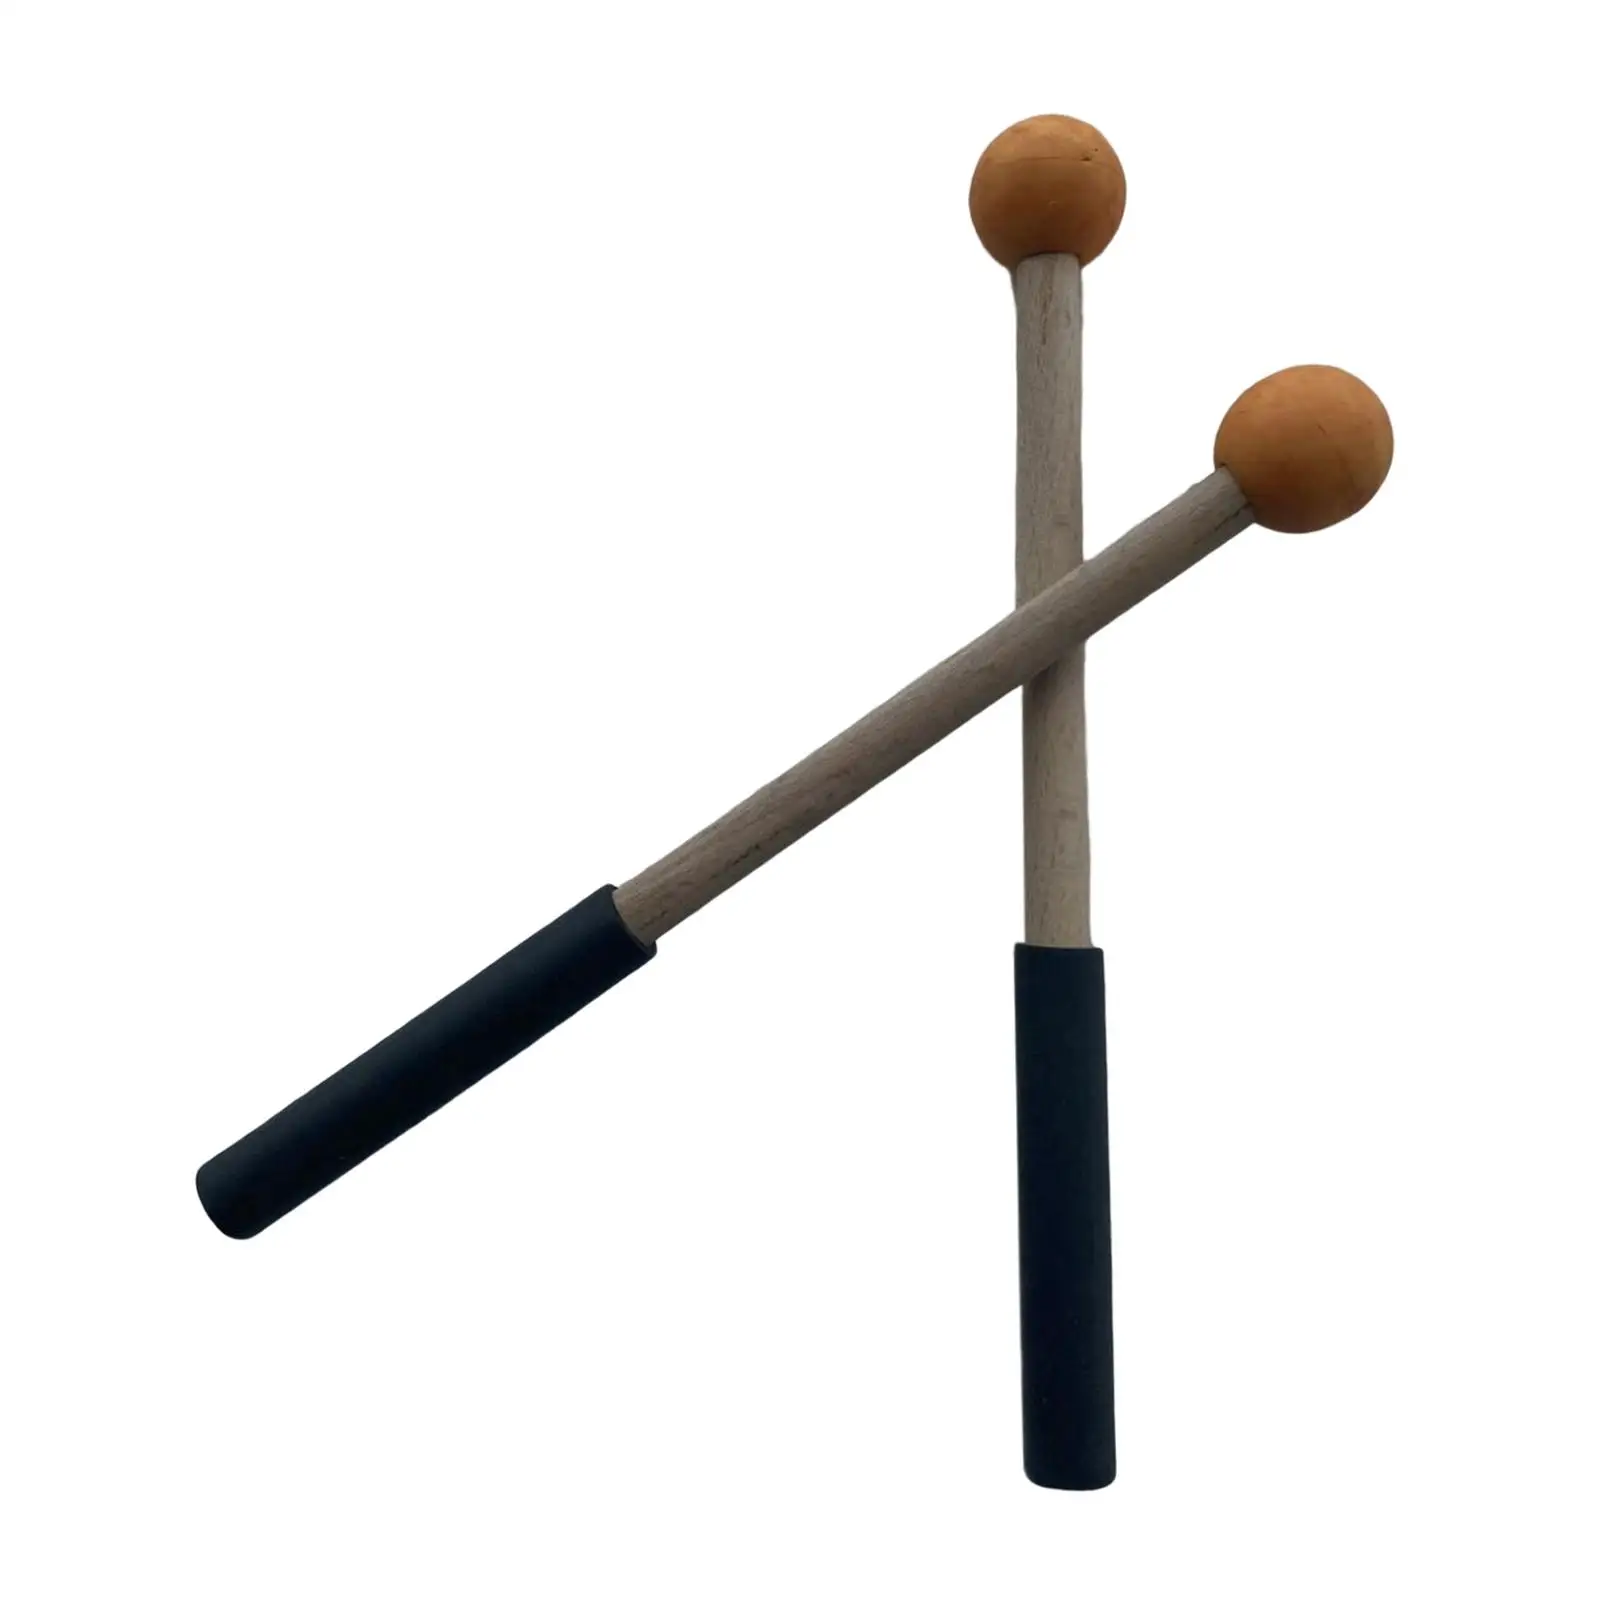 2 Pieces Silicone Drumsticks Cymbal Mallet for Glockenspiel Instrument Kit